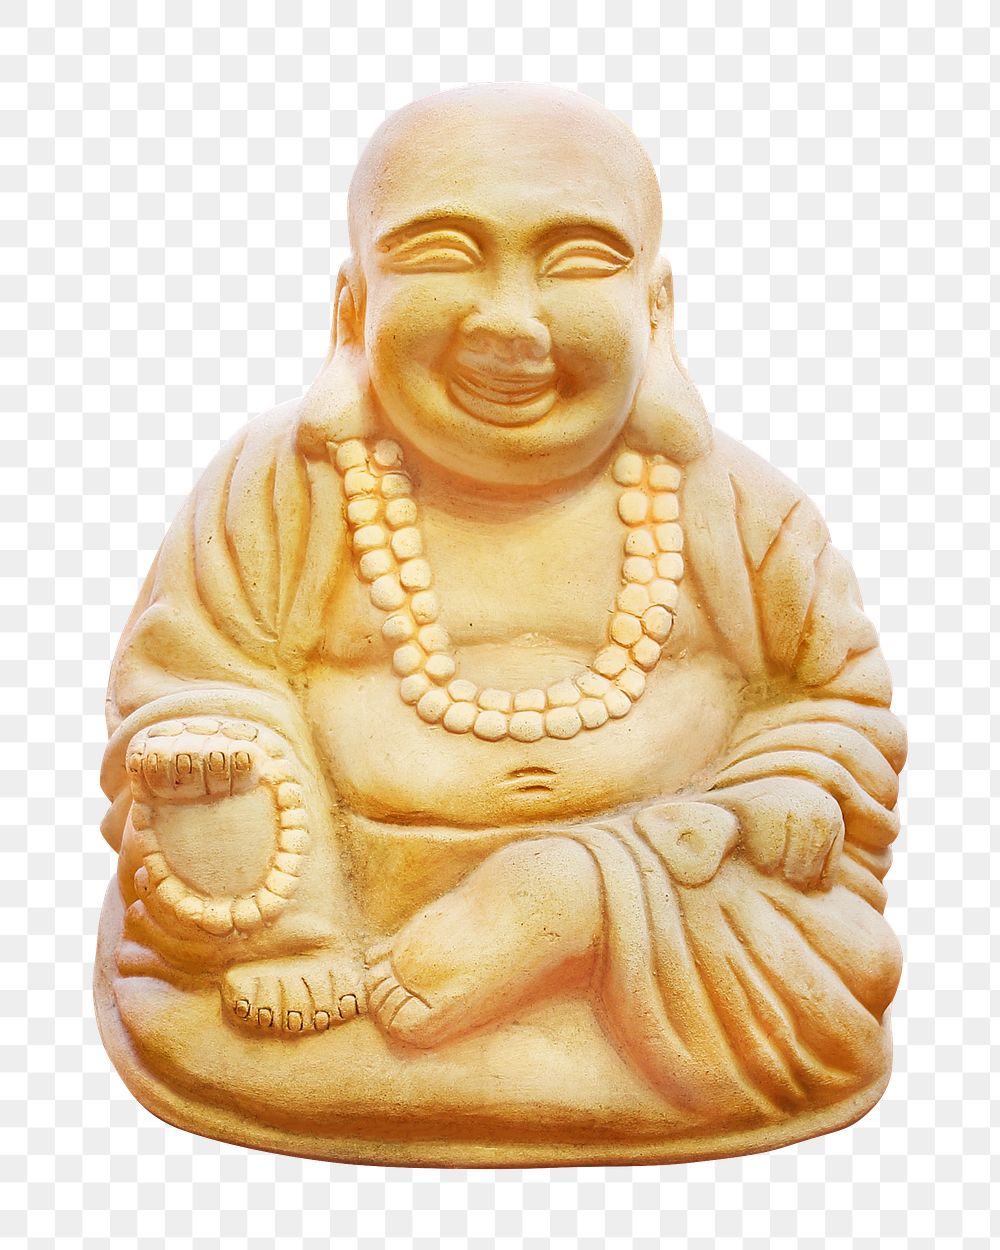 Buddhism religion png monk statue, transparent background